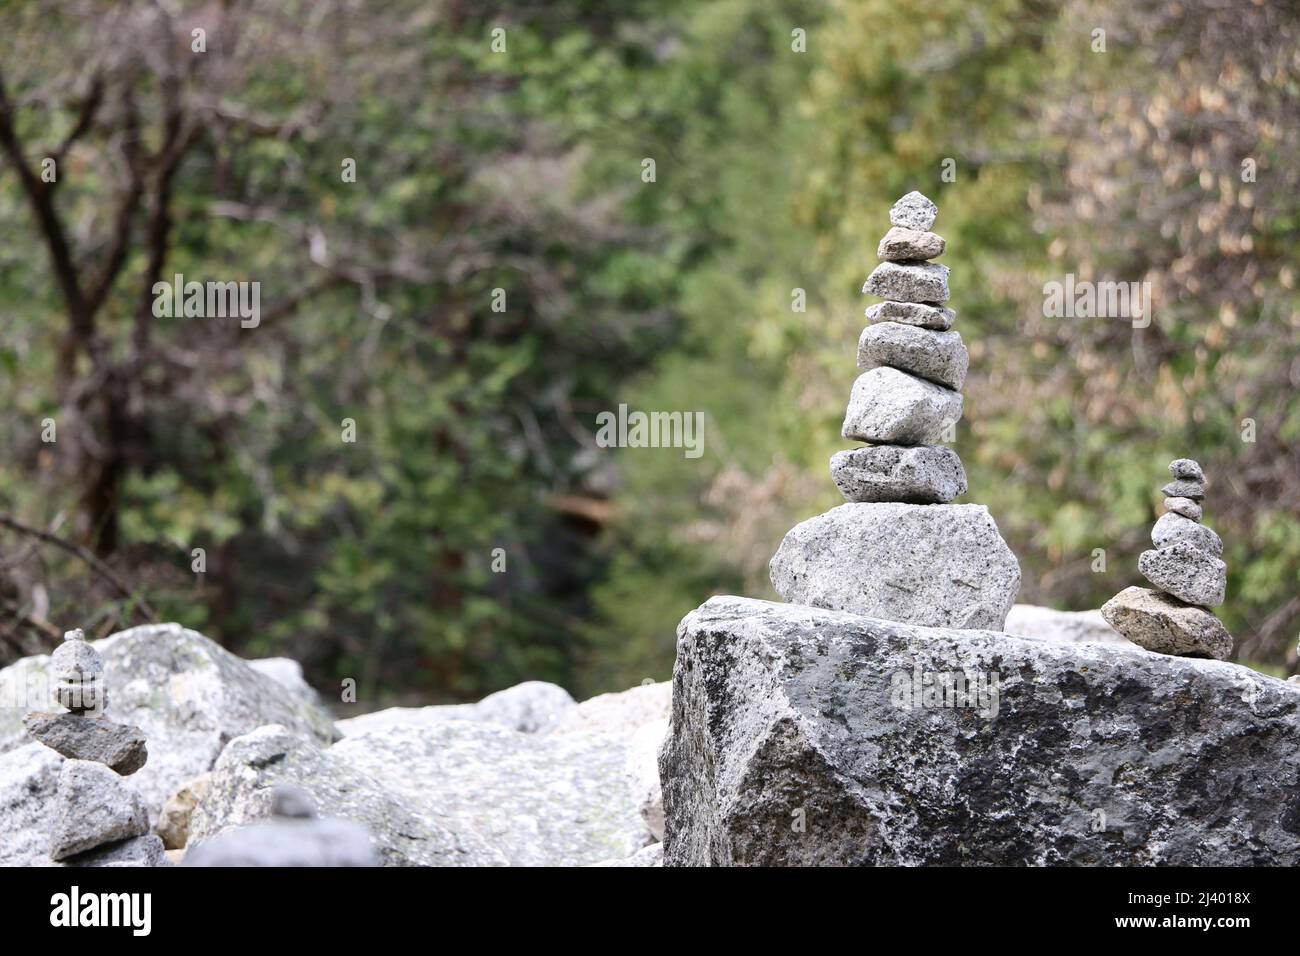 Stone cairns created by hikers in a rock garden at Mirror Lake, Yosemite National Park. Stock Photo